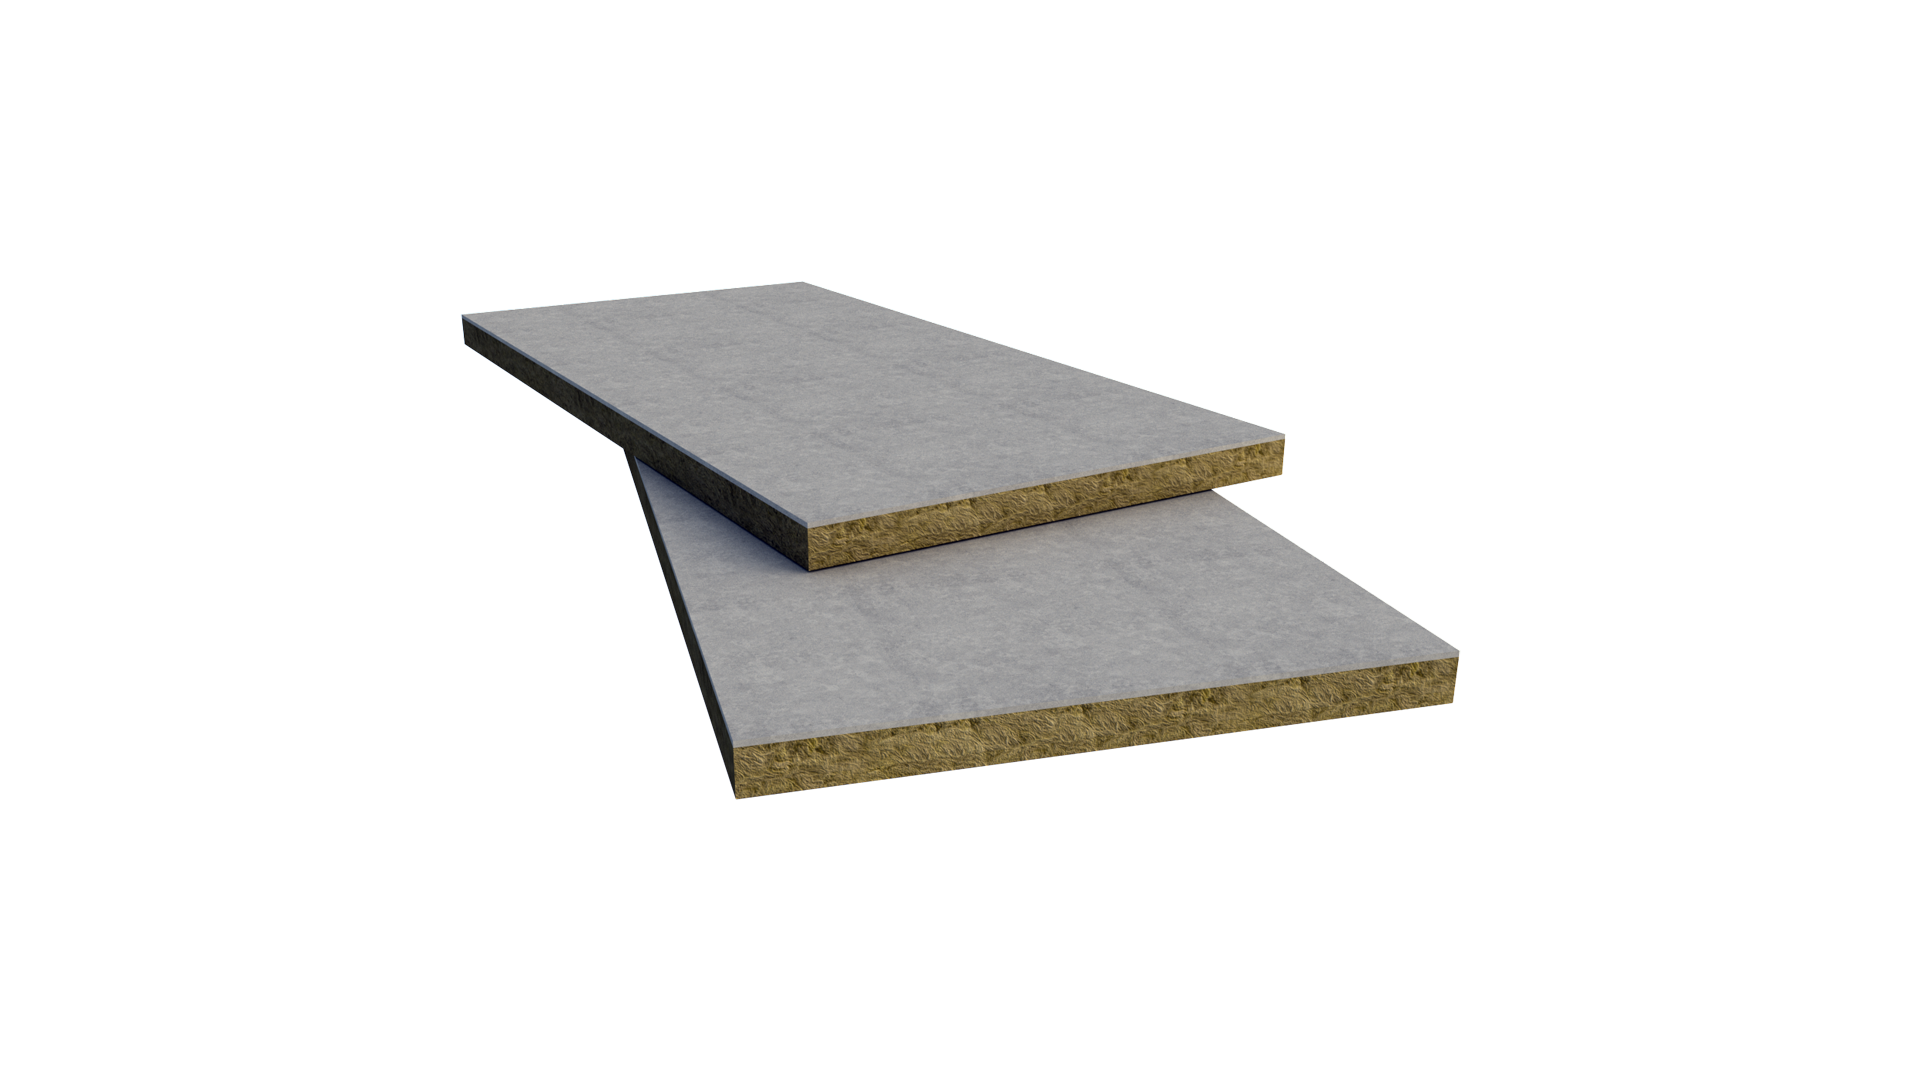 ROCKWOOL® expands flat roof range with non-combustible upstand board